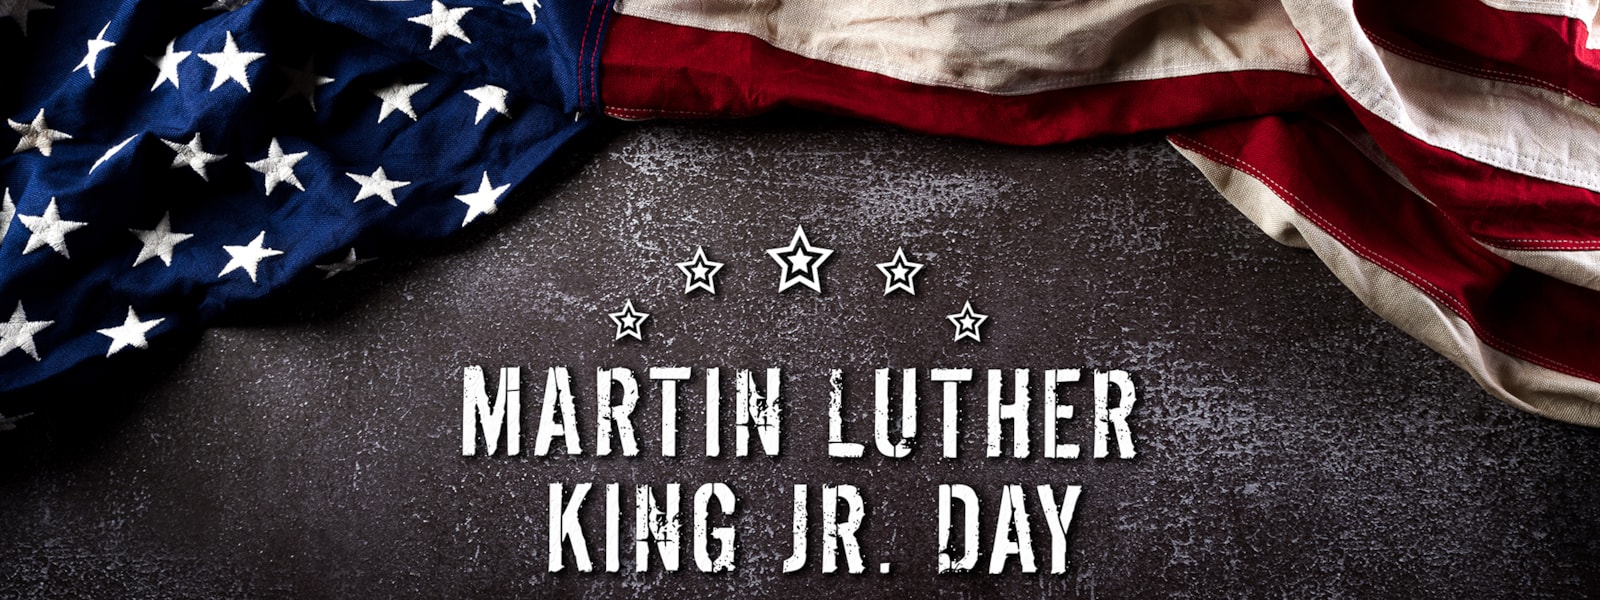 Martin Luther King Jr. Day with American Flag